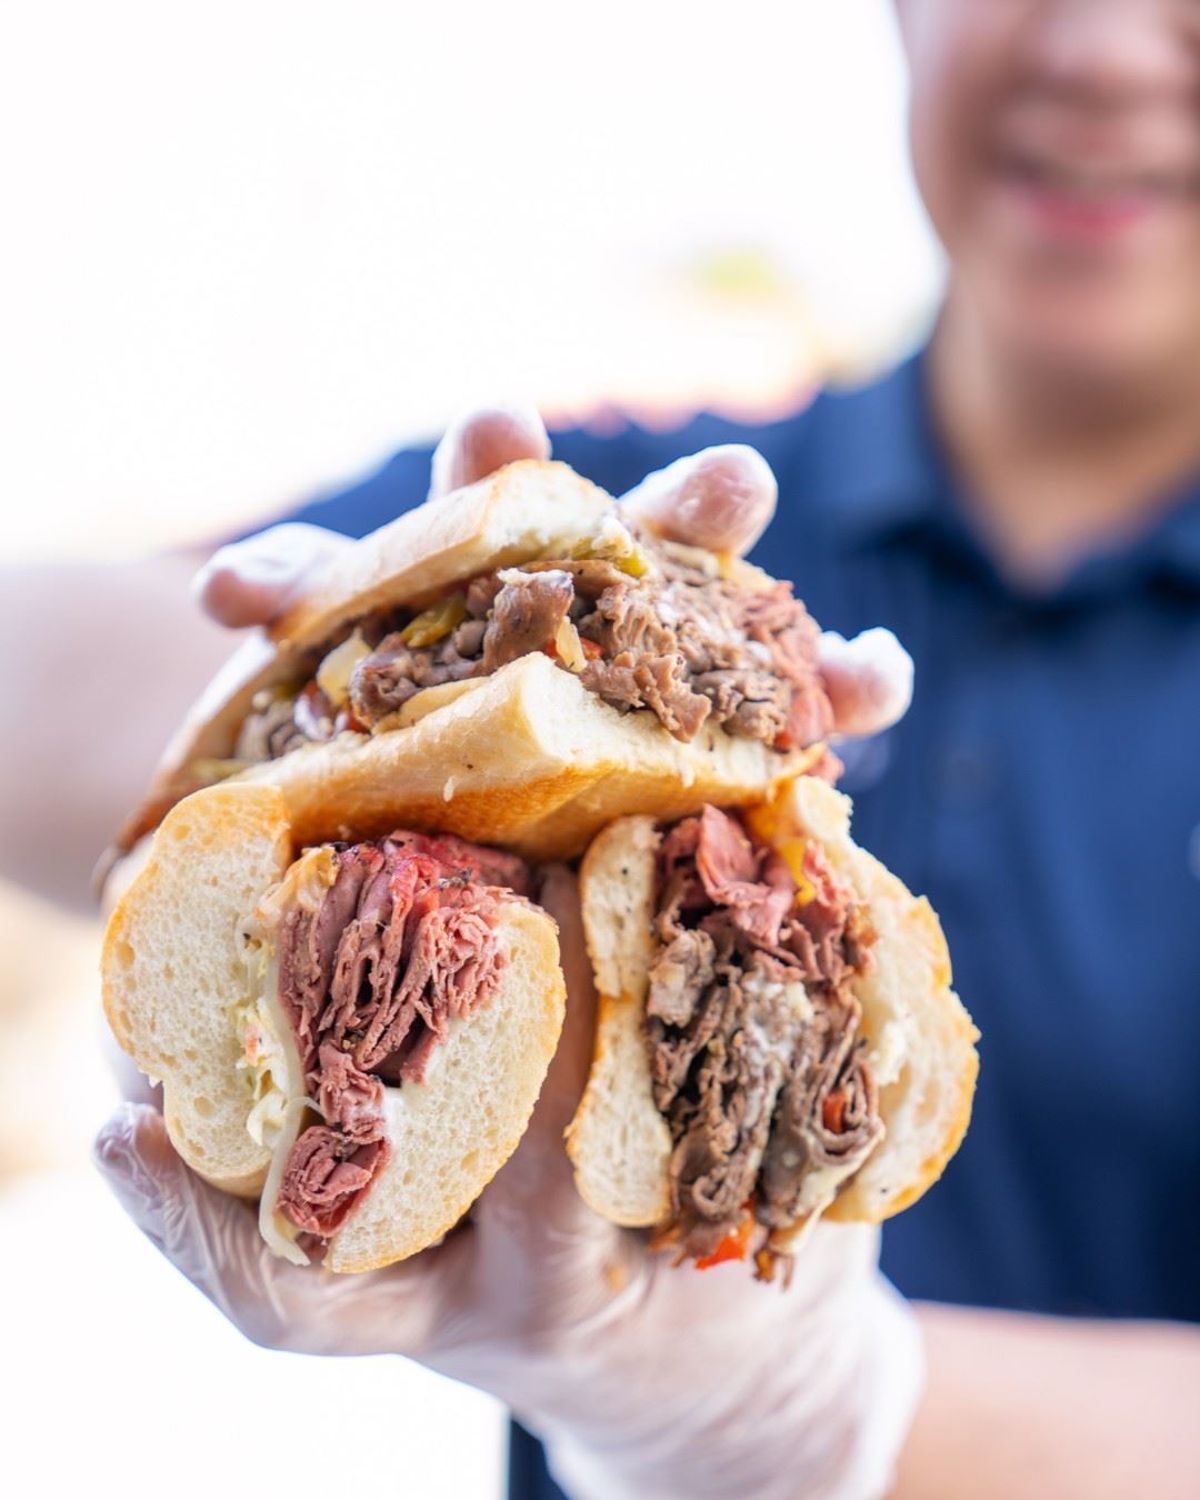 Capriotti's Sandwich Shop Locations to Pop Up Across Denver Metro Area Plus More from What Now Media Group's Weekly Pre-Opening Restaurant News Report